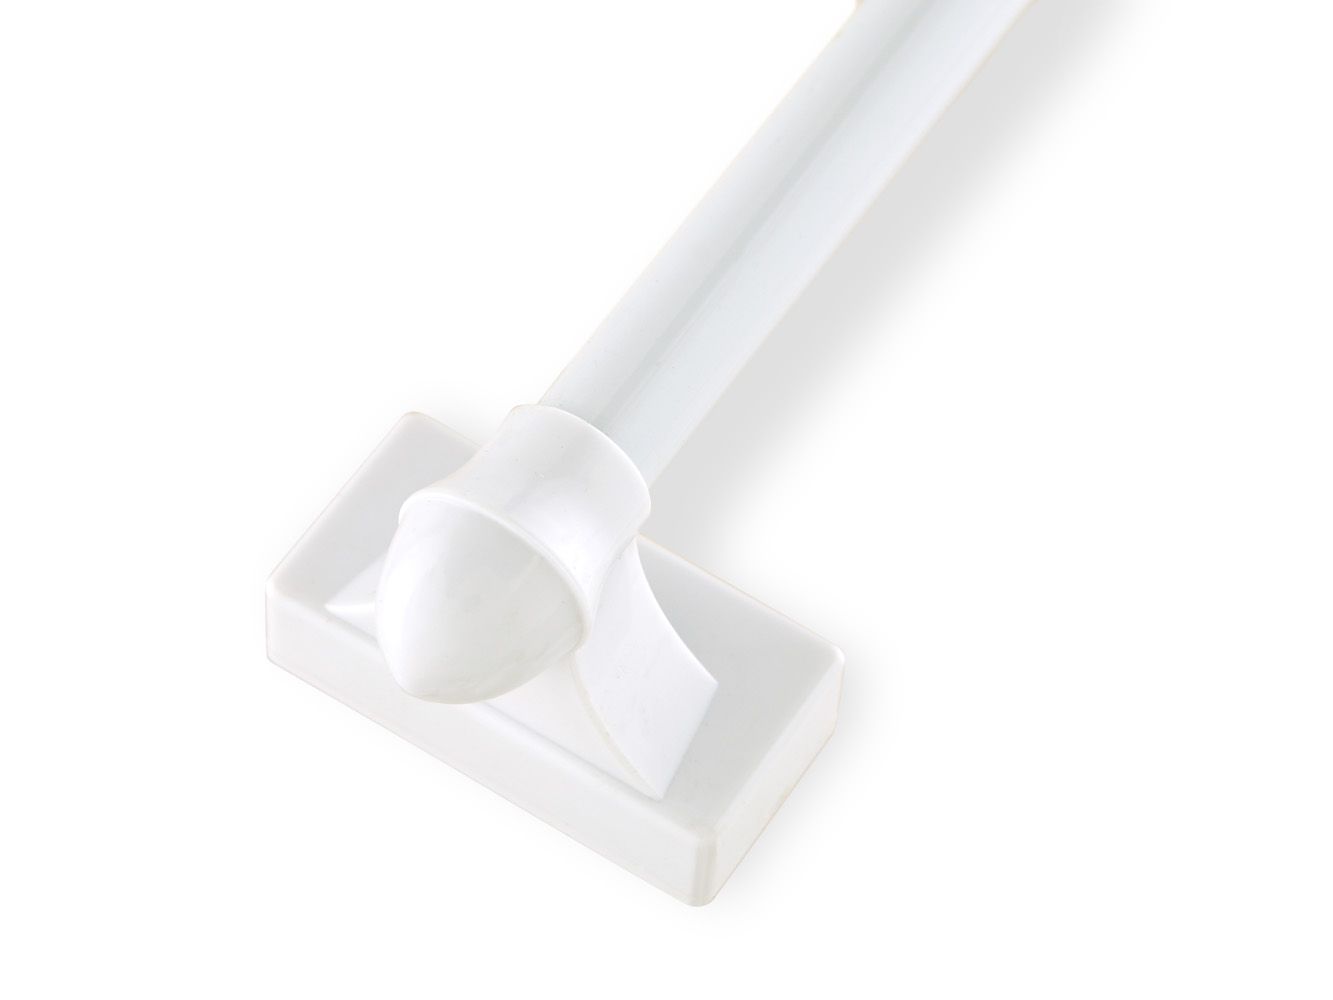 UPC 781389001023 product image for Skotz Manufacturing White Magnetic curtain rod | upcitemdb.com